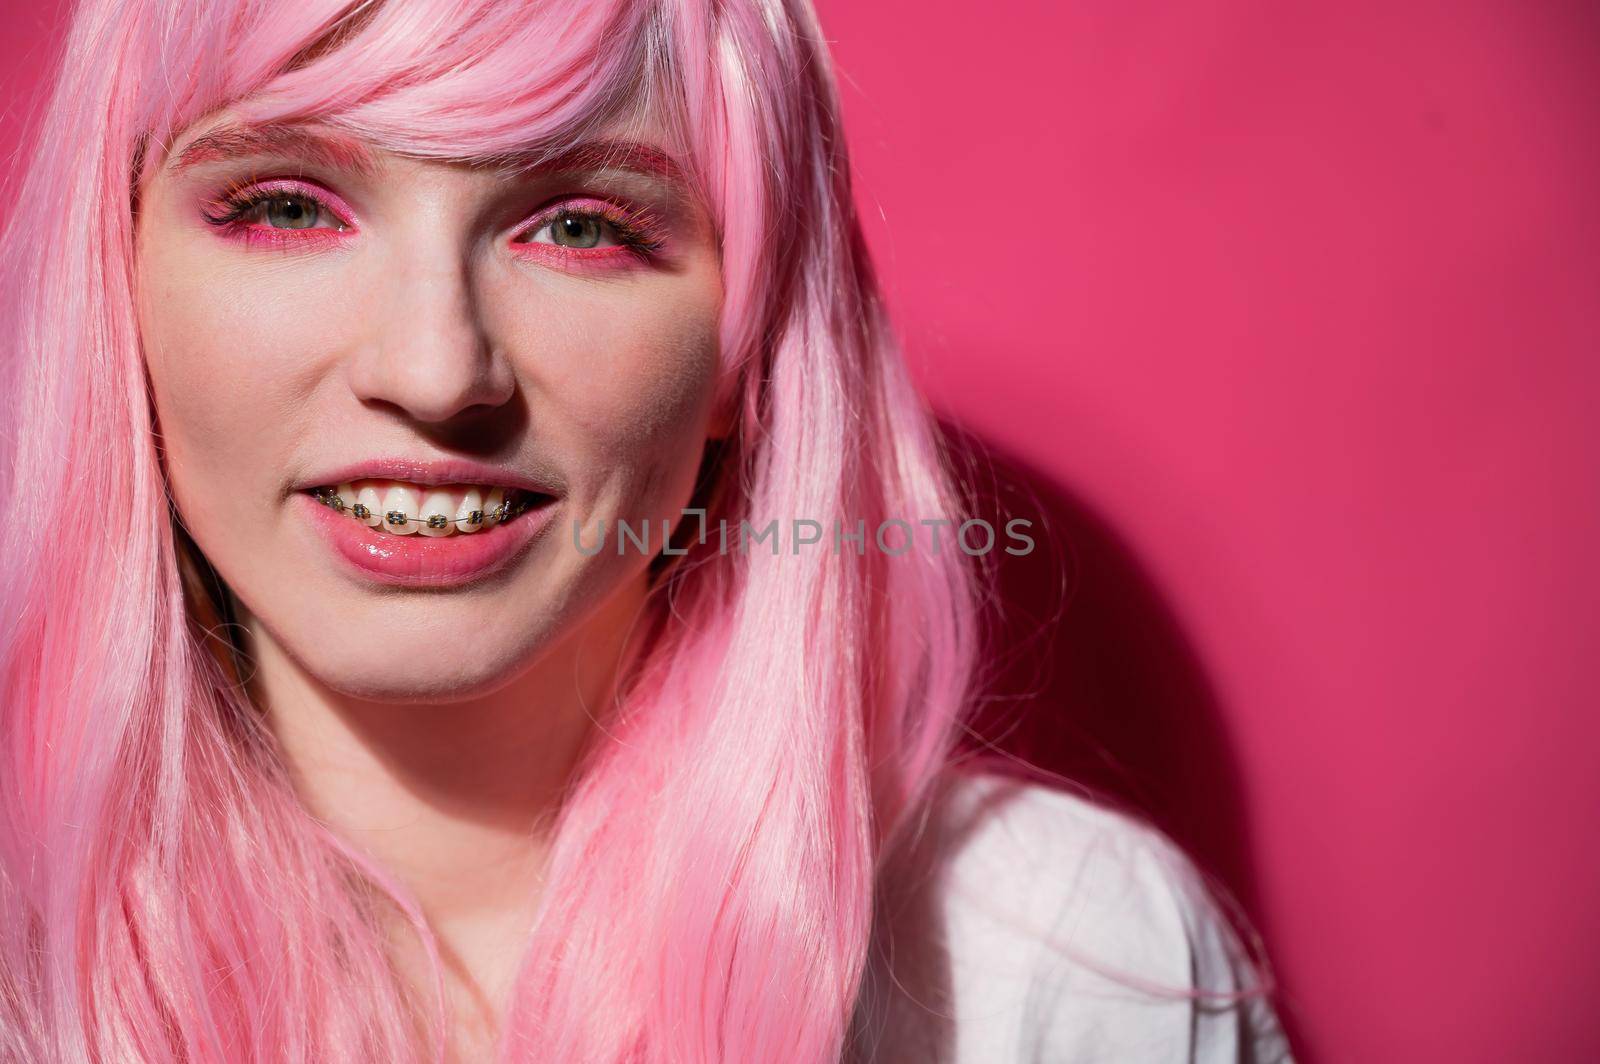 Close-up portrait of a young woman with braces in a pink wig on a pink background. by mrwed54